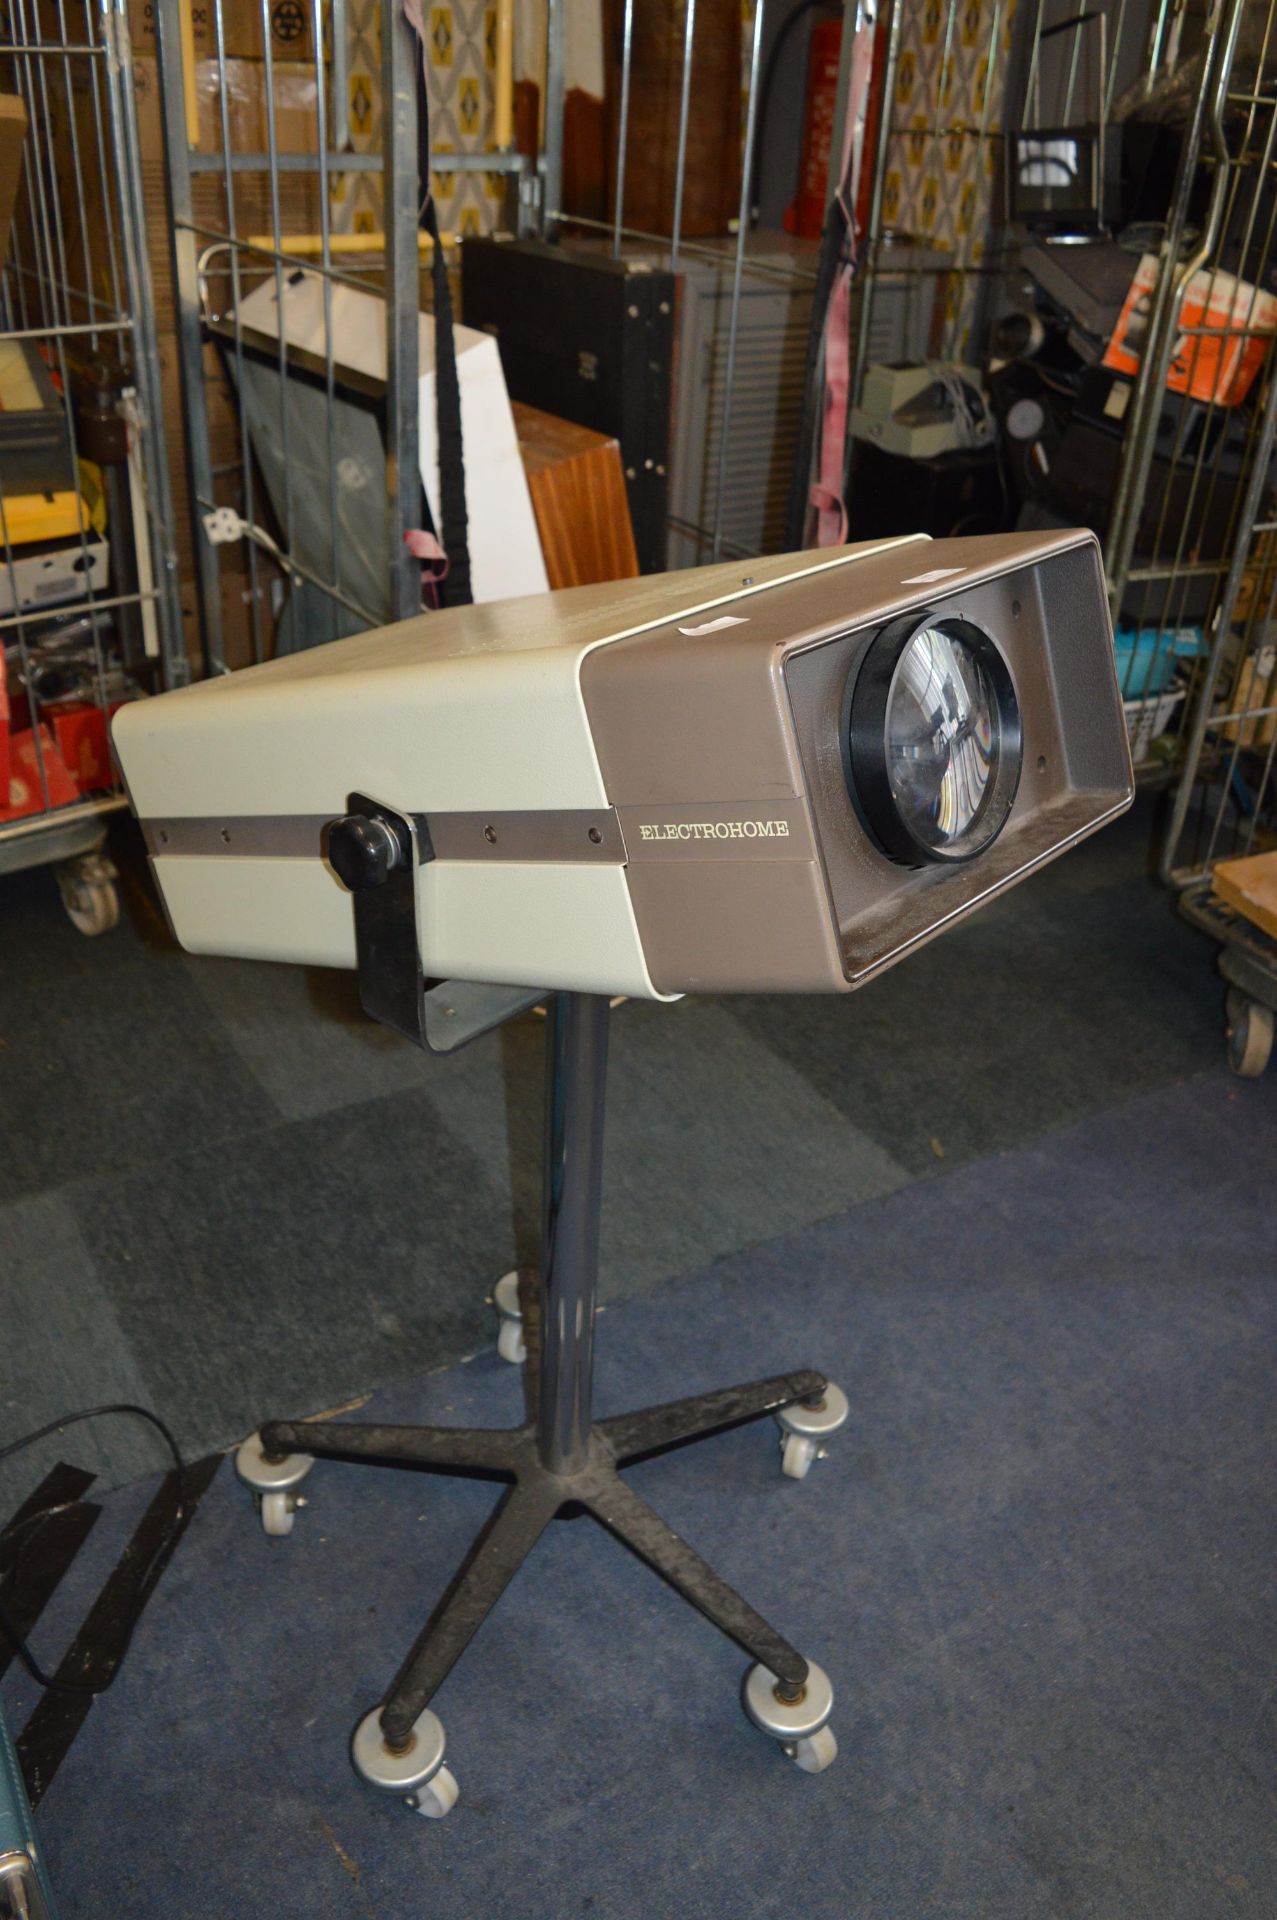 Electrohome Projector on Wheeled Stand